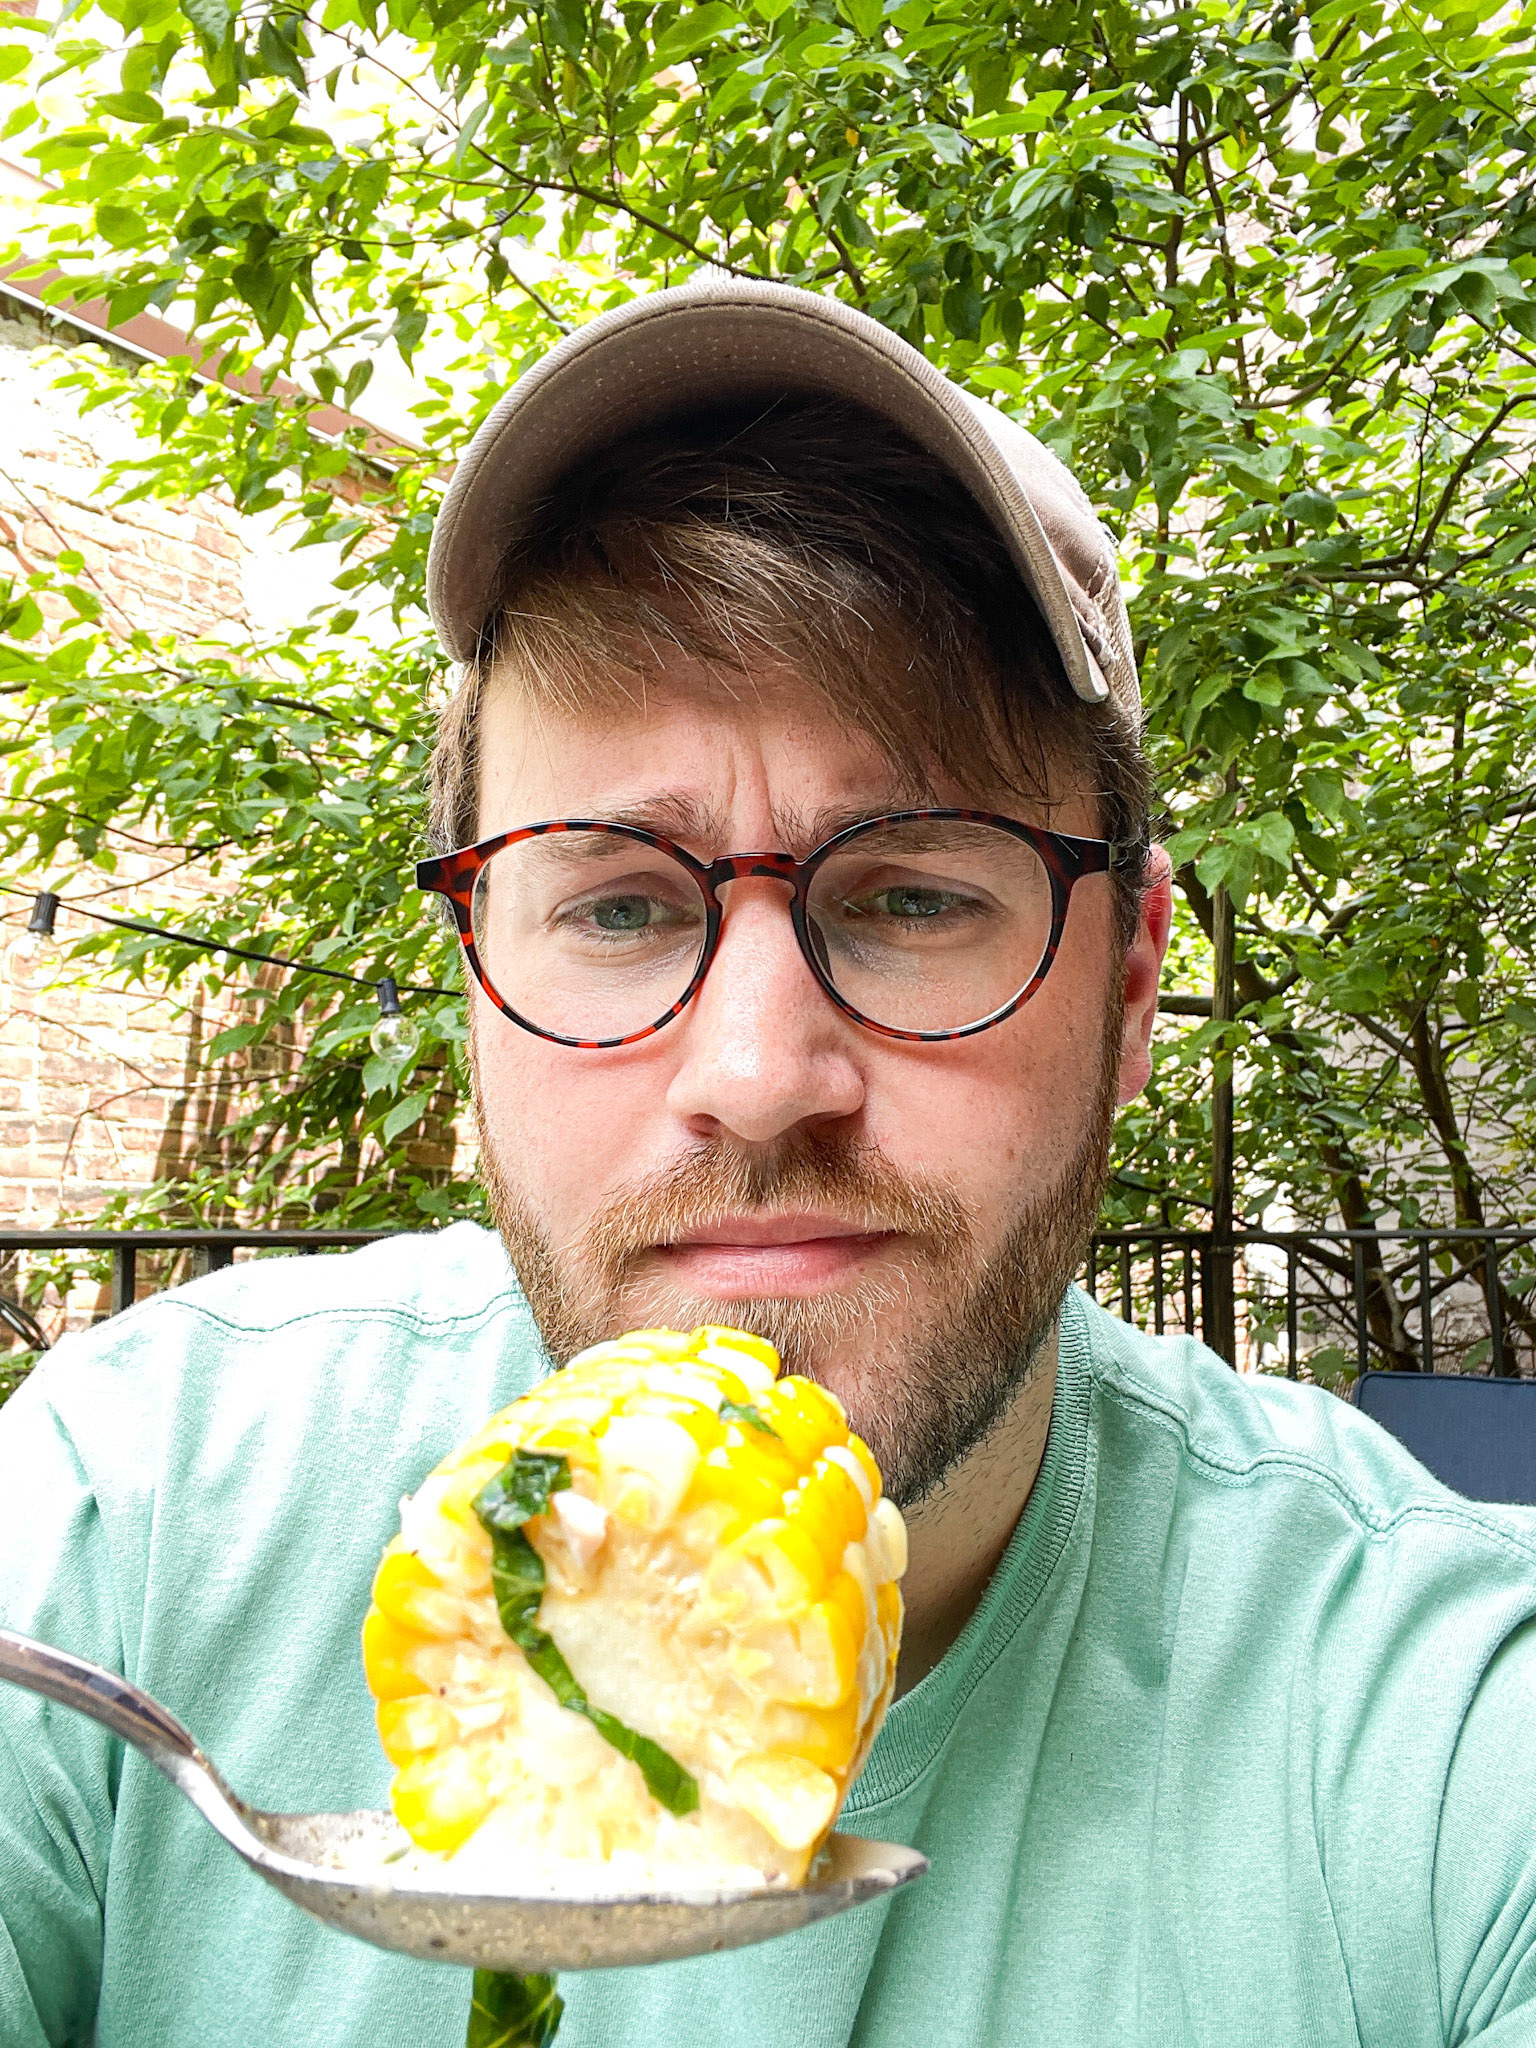 The writer looking sad as he picks up a big piece of soup-soaked corn with his spoon